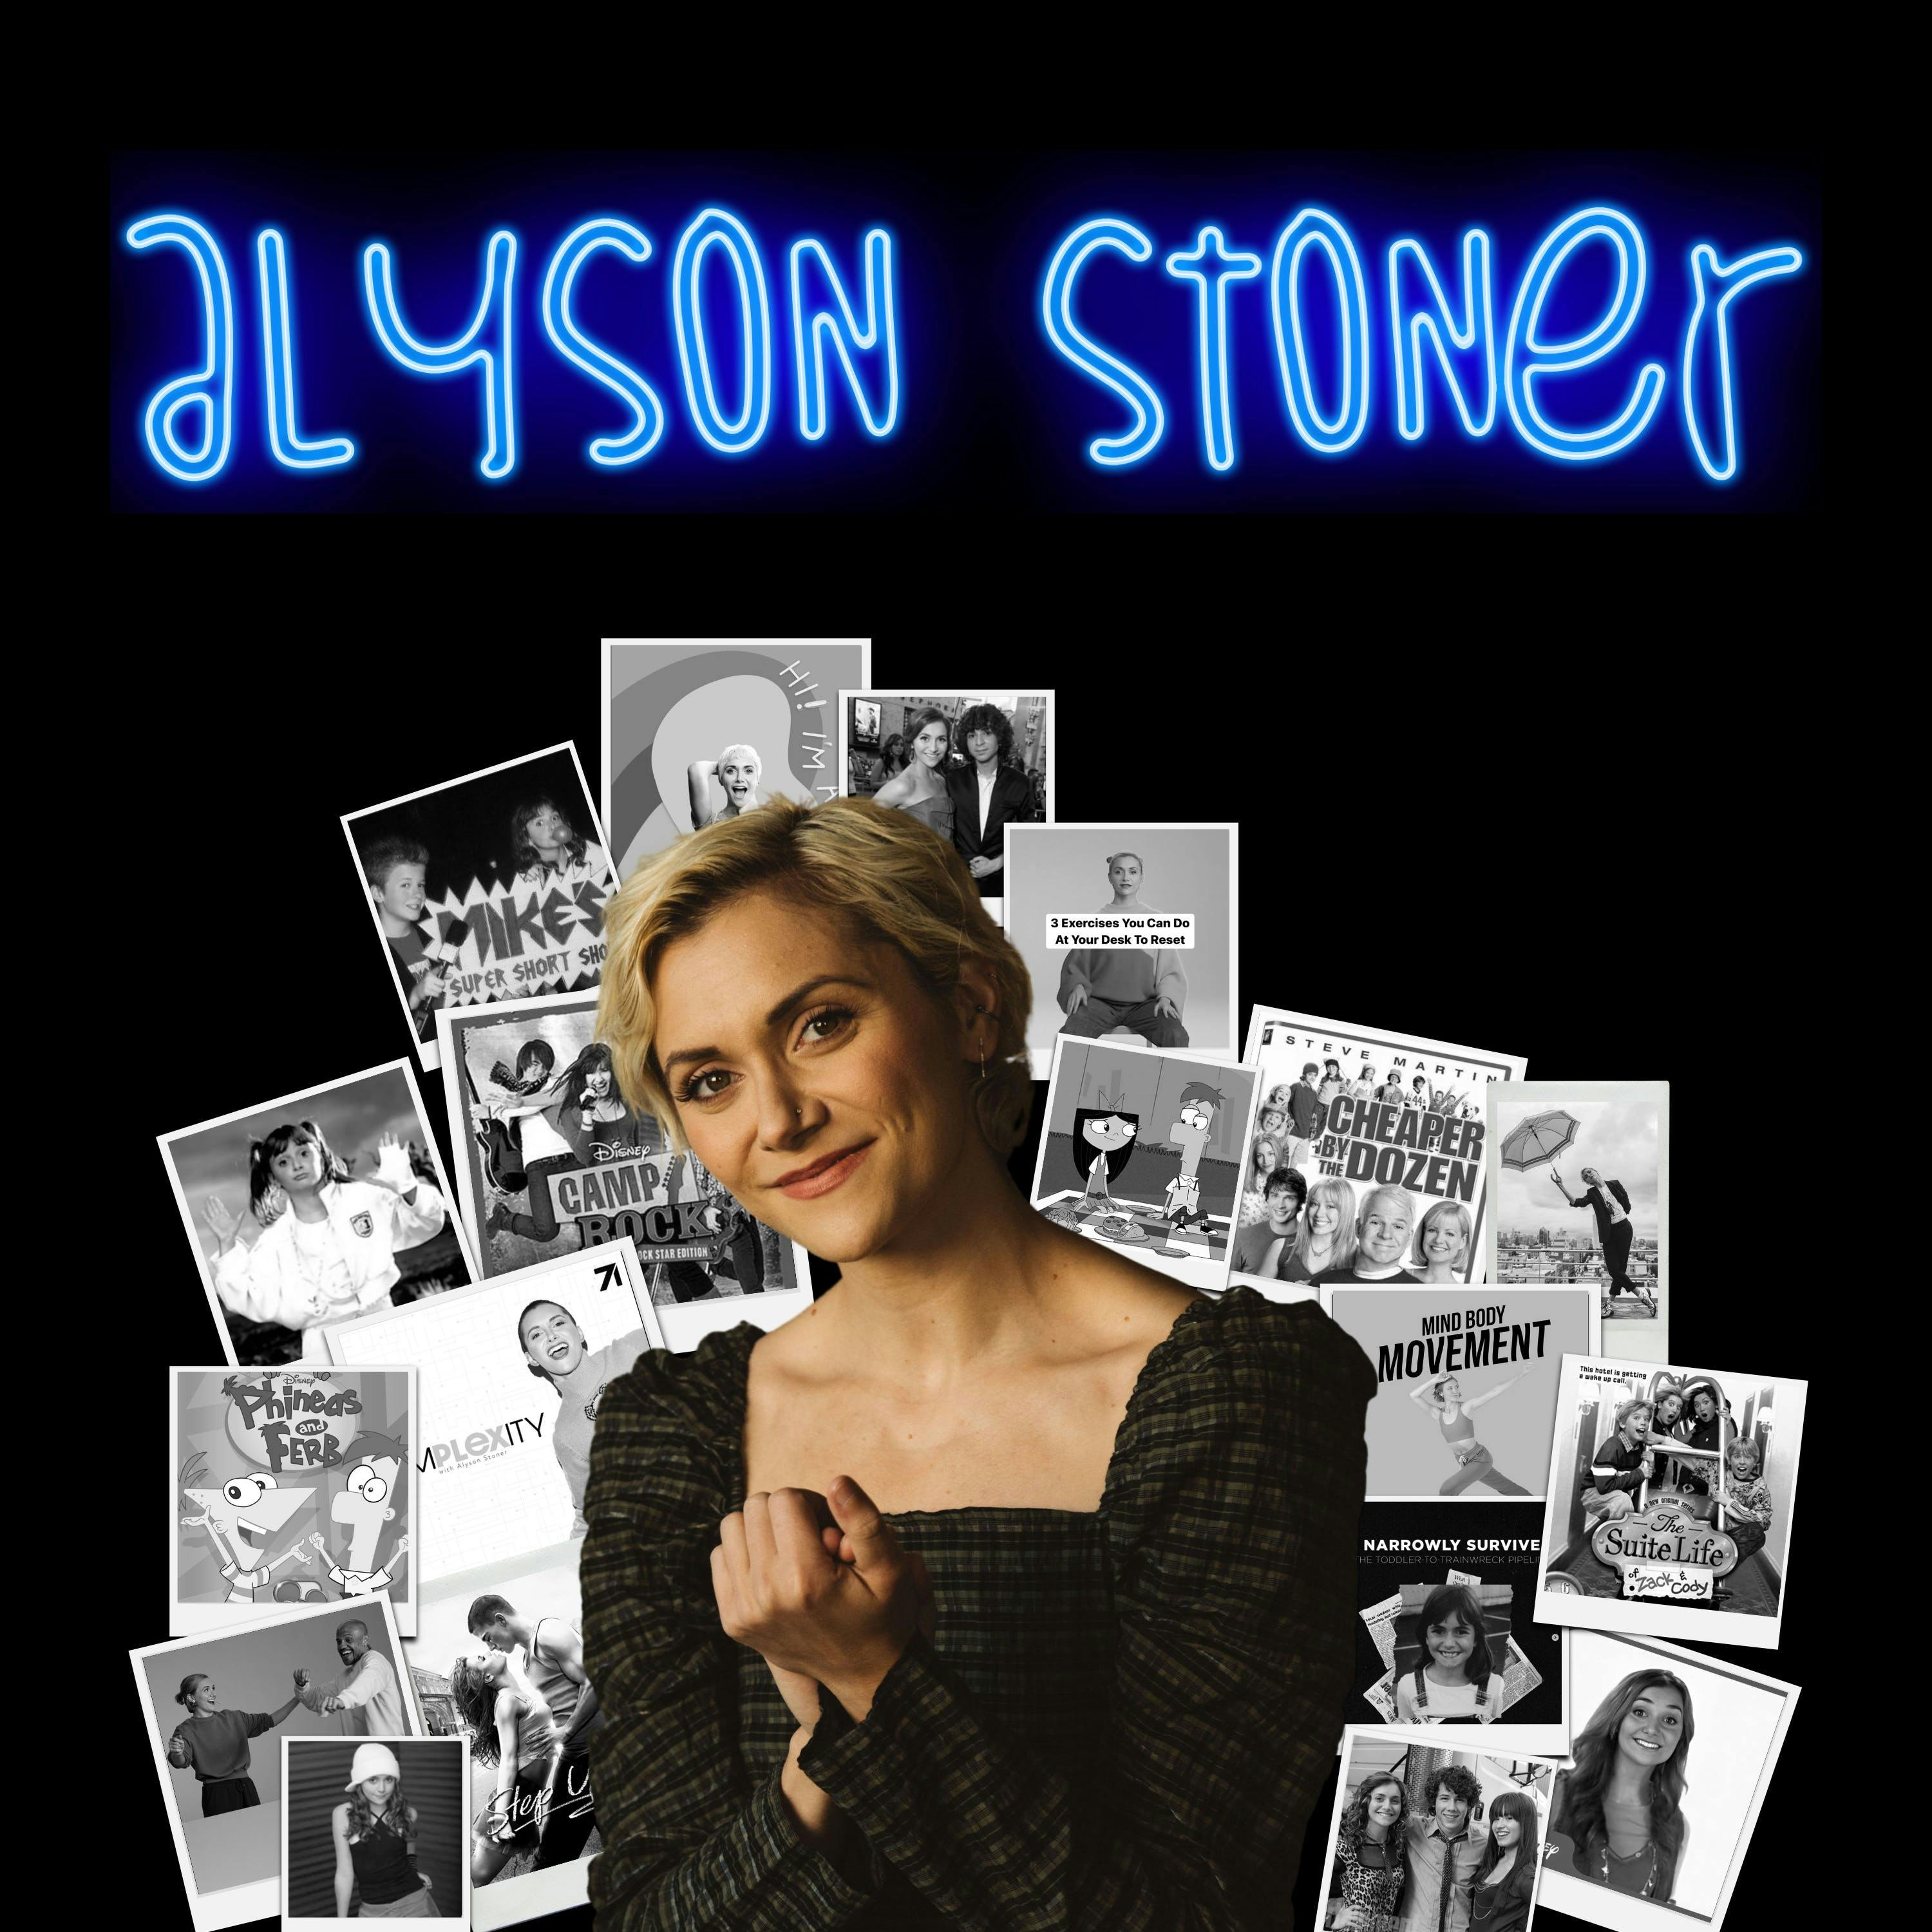 Disney Star Alyson Stoner Opens Up About Eating Disorder